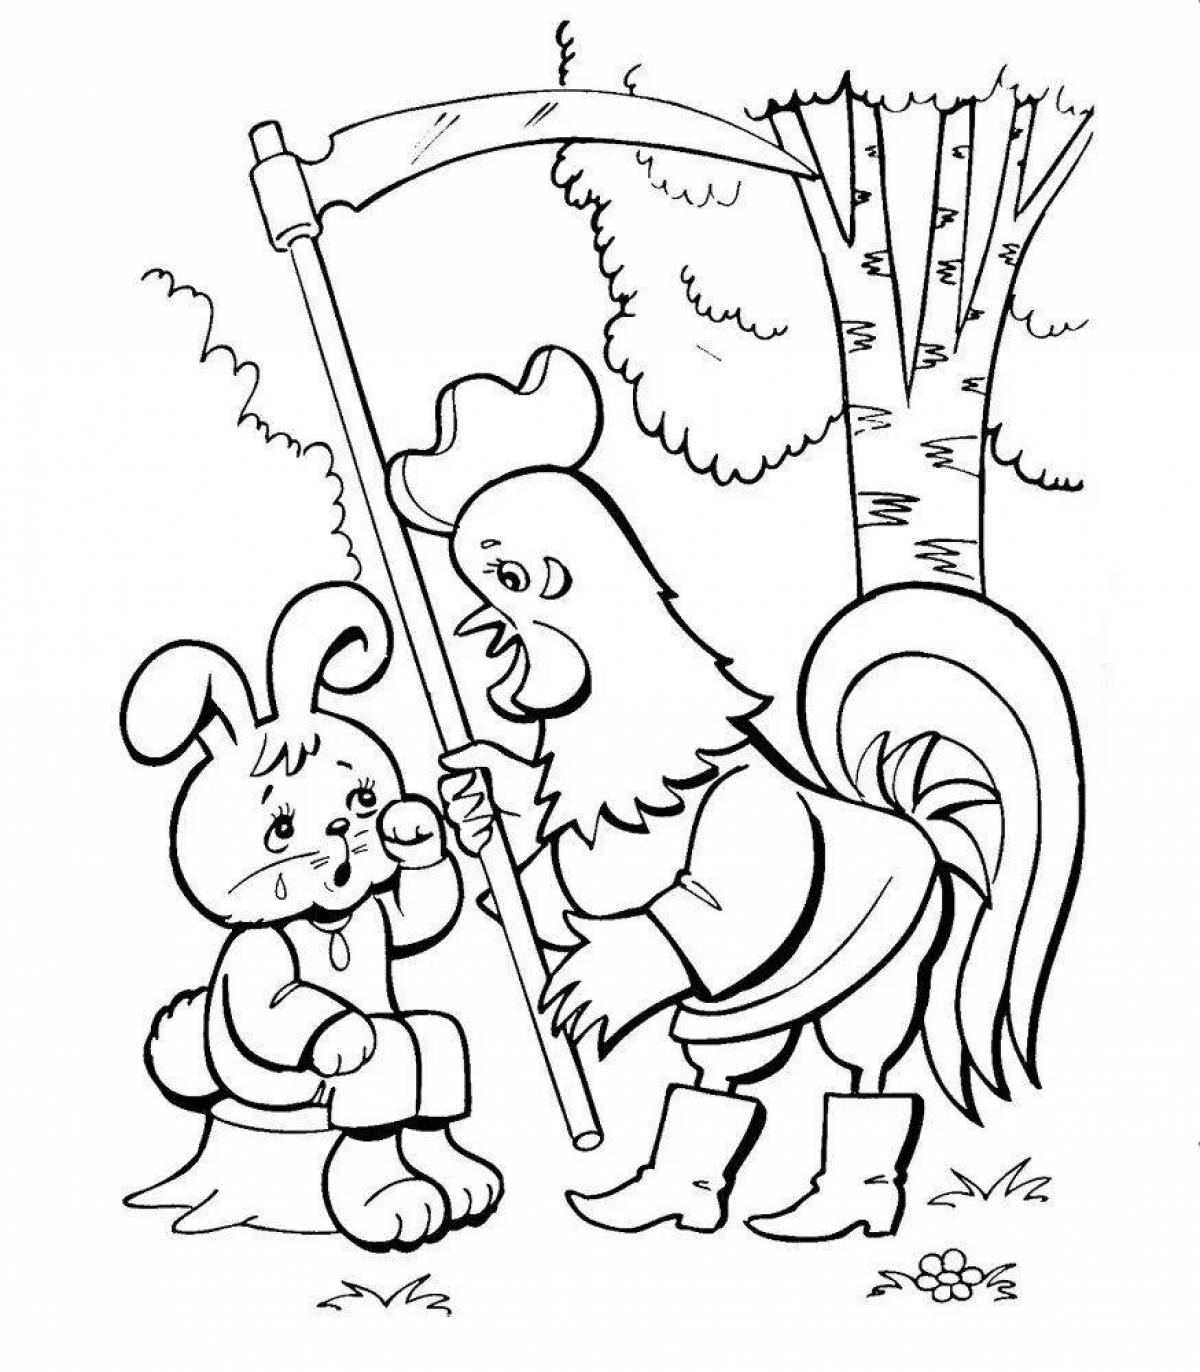 Coloring book funny fairy tale